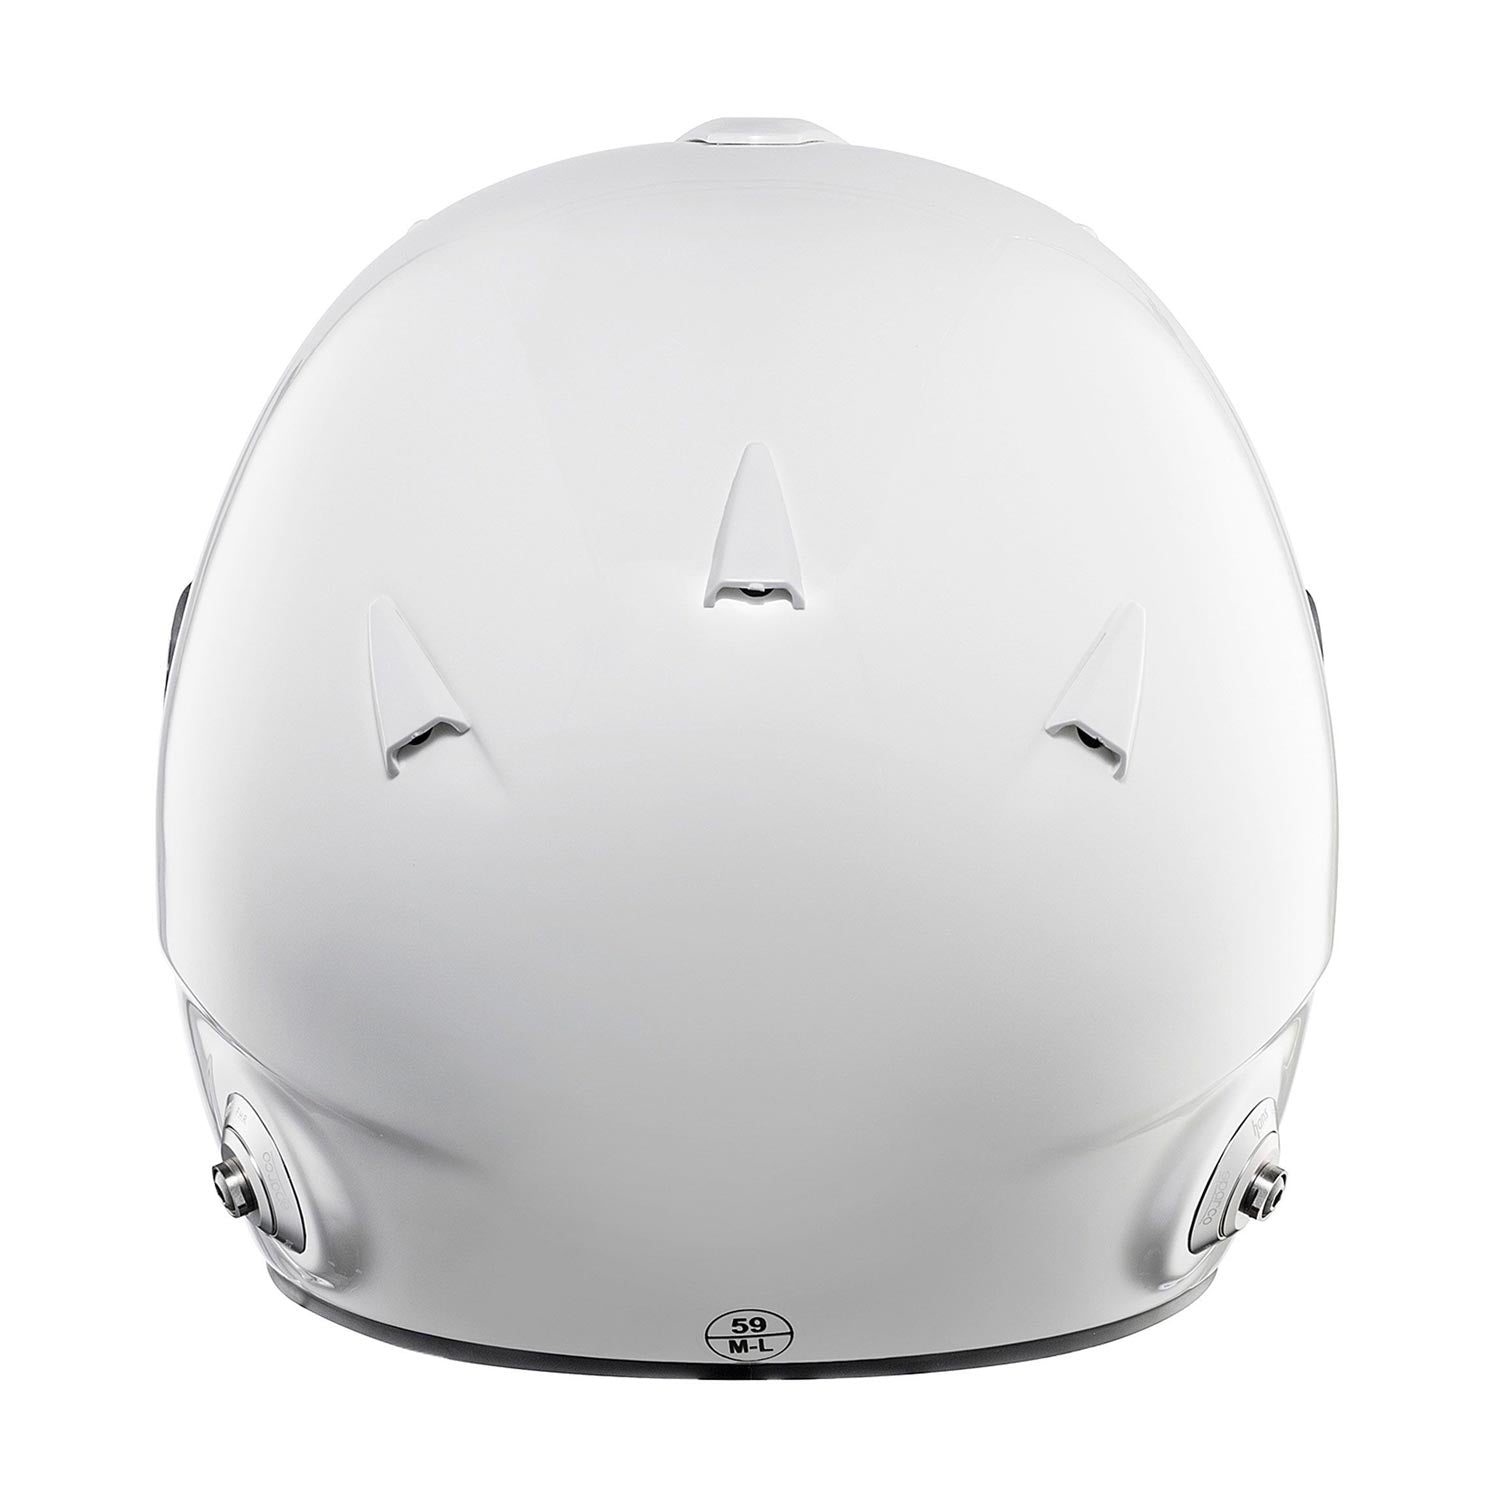 SPARCO 003375BIRS4L RF-5W Racing helmet, FIA/SNELL SA2020, white/red, size L (60) Photo-1 